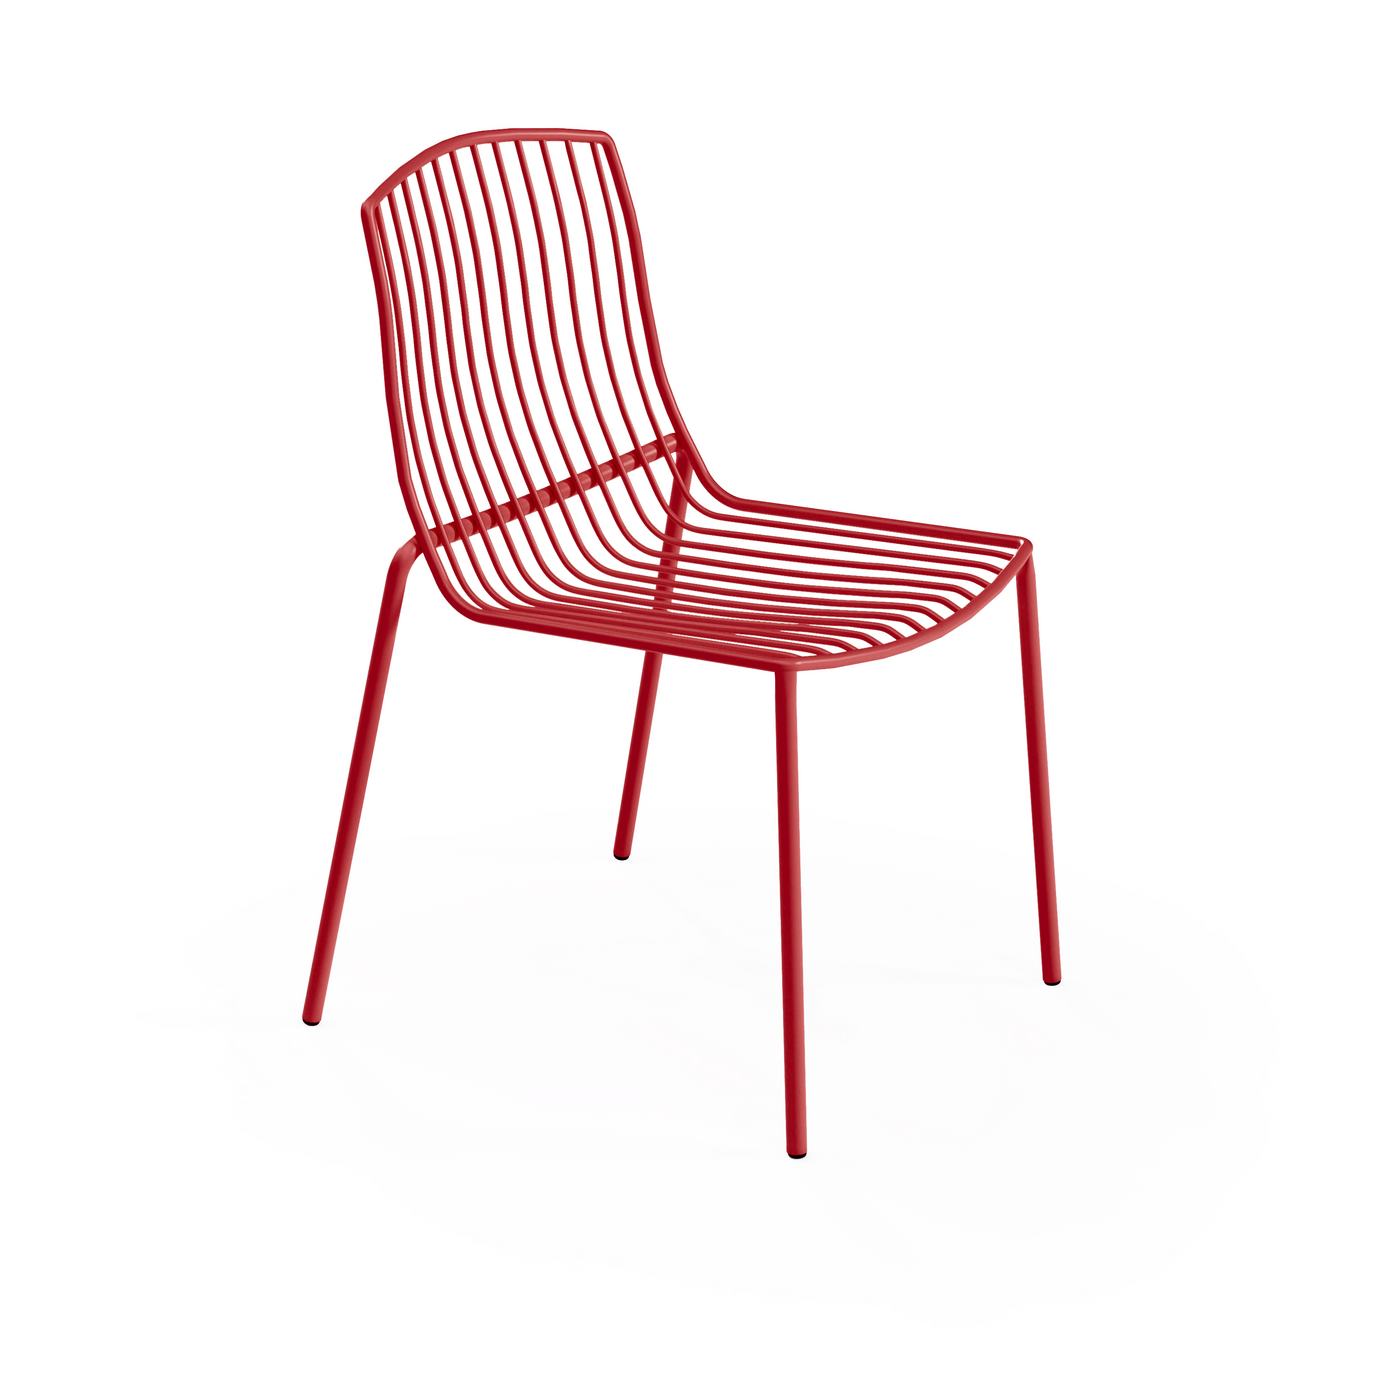 Frame Stackable Metal Garden Chair, Berry Red (Set of 2)